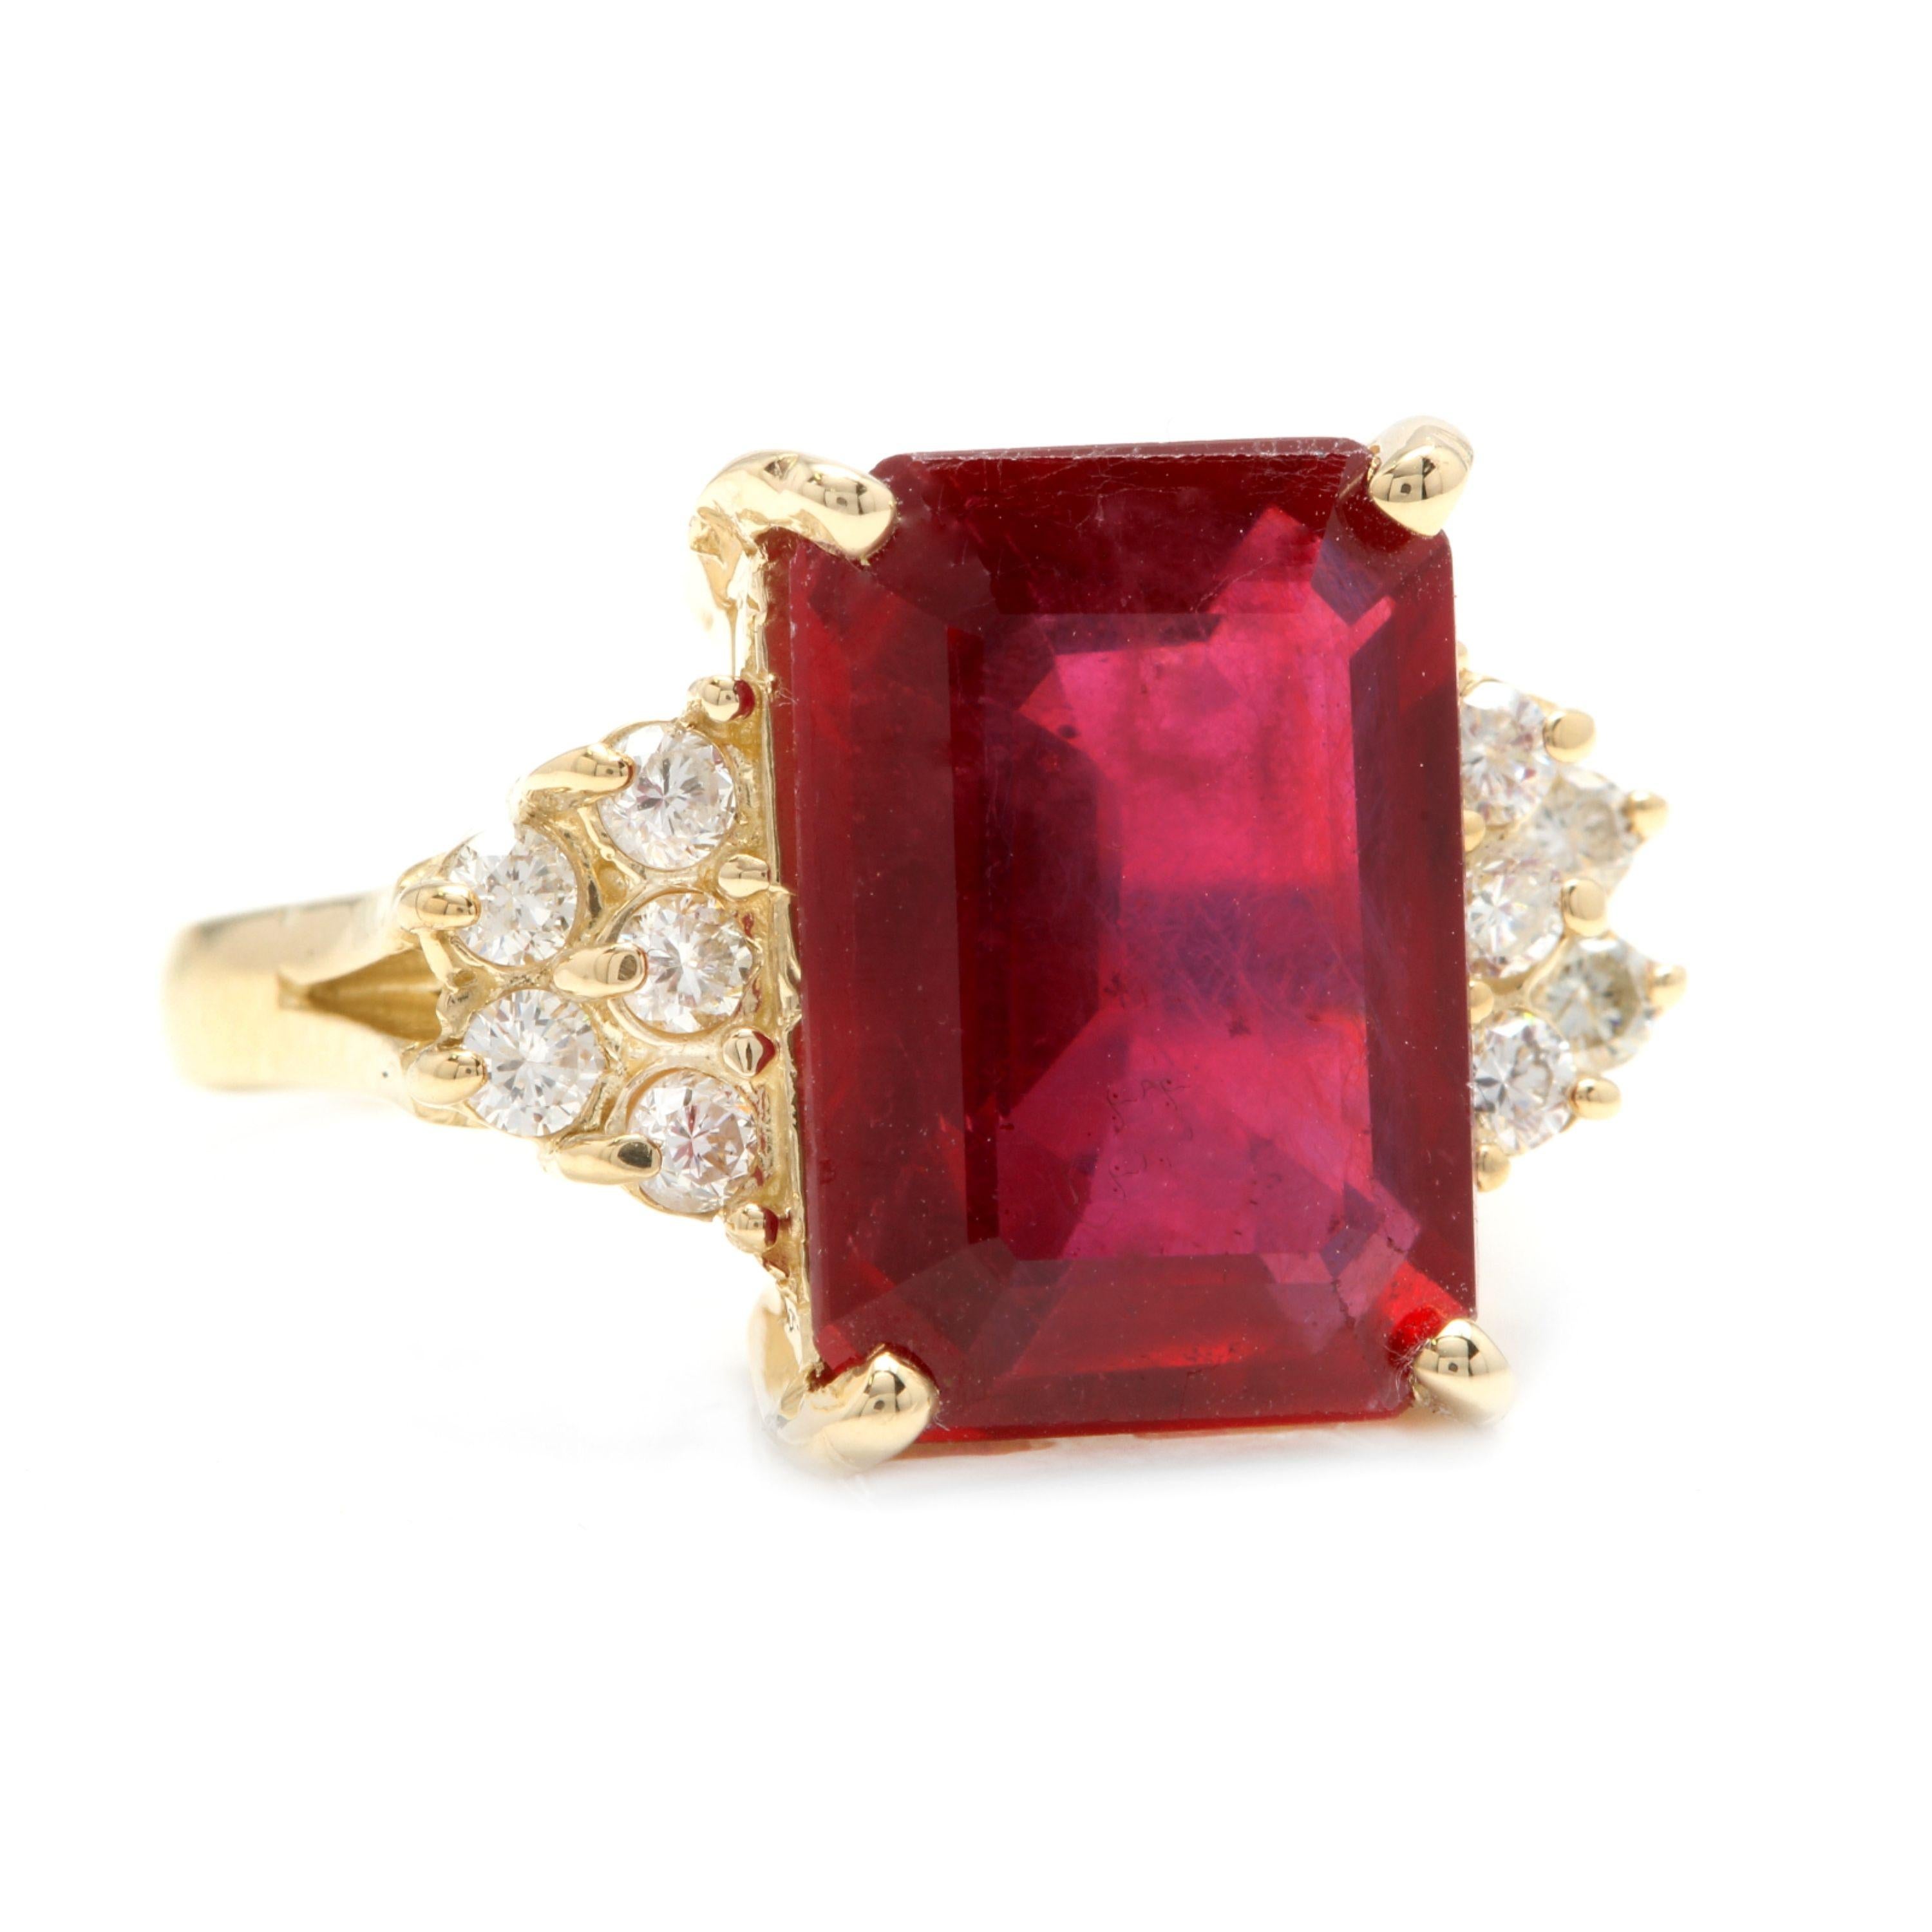 12.60 Carats Impressive Natural Red Ruby and Diamond 14K Yellow Gold Ring

Total Red Ruby Weight is Approx. 12.00 Carats

Ruby Measures: Approx. 13.00 x 10.00mm

Ruby Treatment: Lead Glass Filling

Natural Round Diamonds Weight: Approx. 0.60 Carats